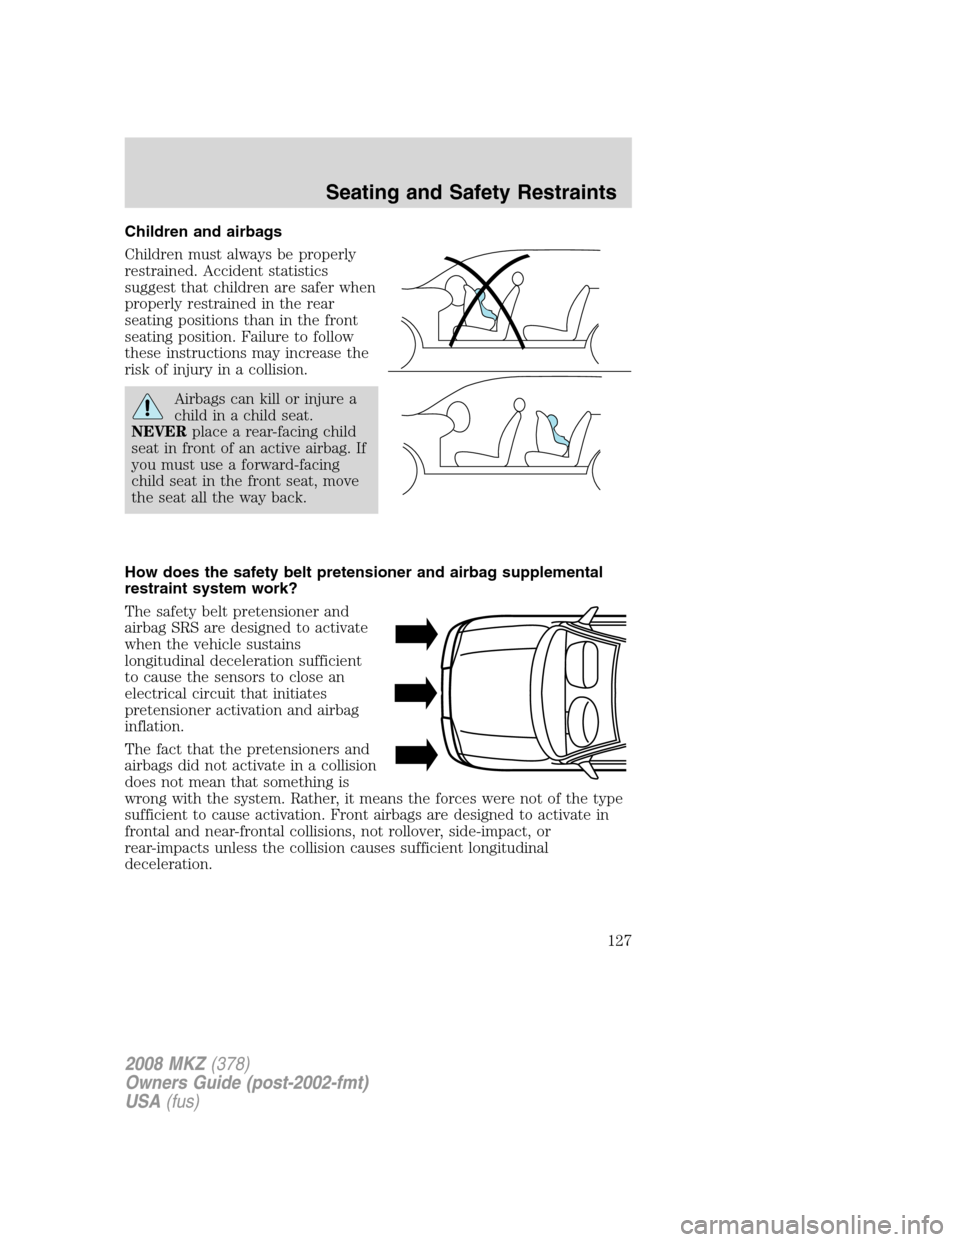 LINCOLN MKZ 2008 User Guide Children and airbags
Children must always be properly
restrained. Accident statistics
suggest that children are safer when
properly restrained in the rear
seating positions than in the front
seating p